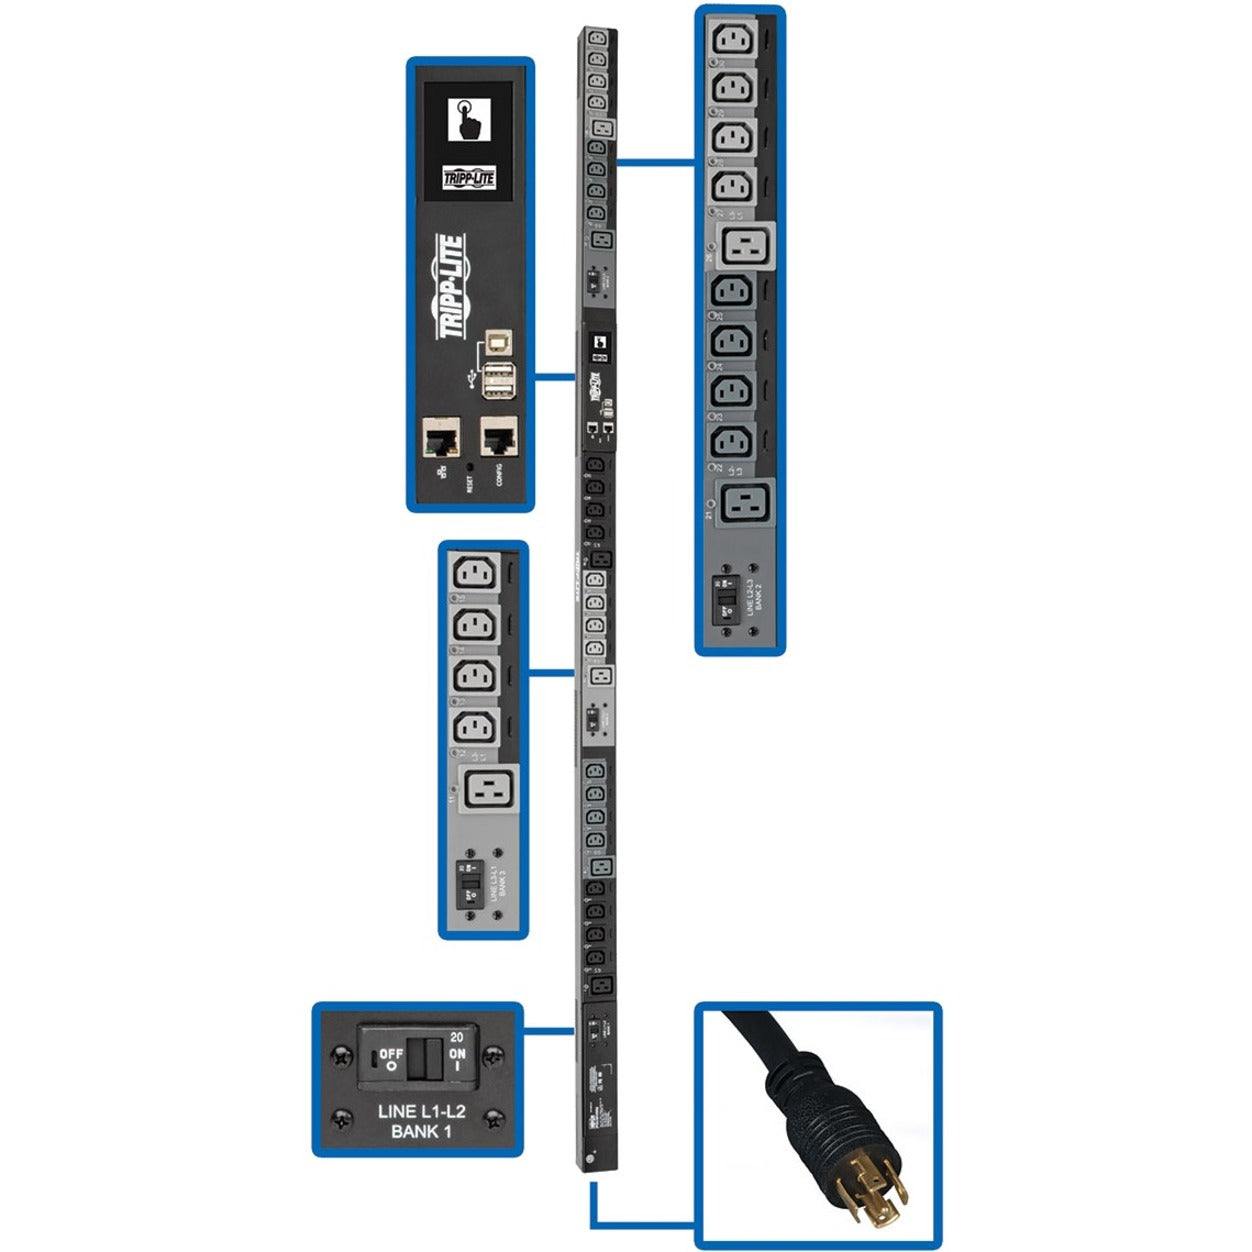 Tripp Lite PDU3EVSR10L1530 10kW 3-Phase Switched PDU, Remote Outlet Switching, 24 C13 6 C19, 200/208/240V